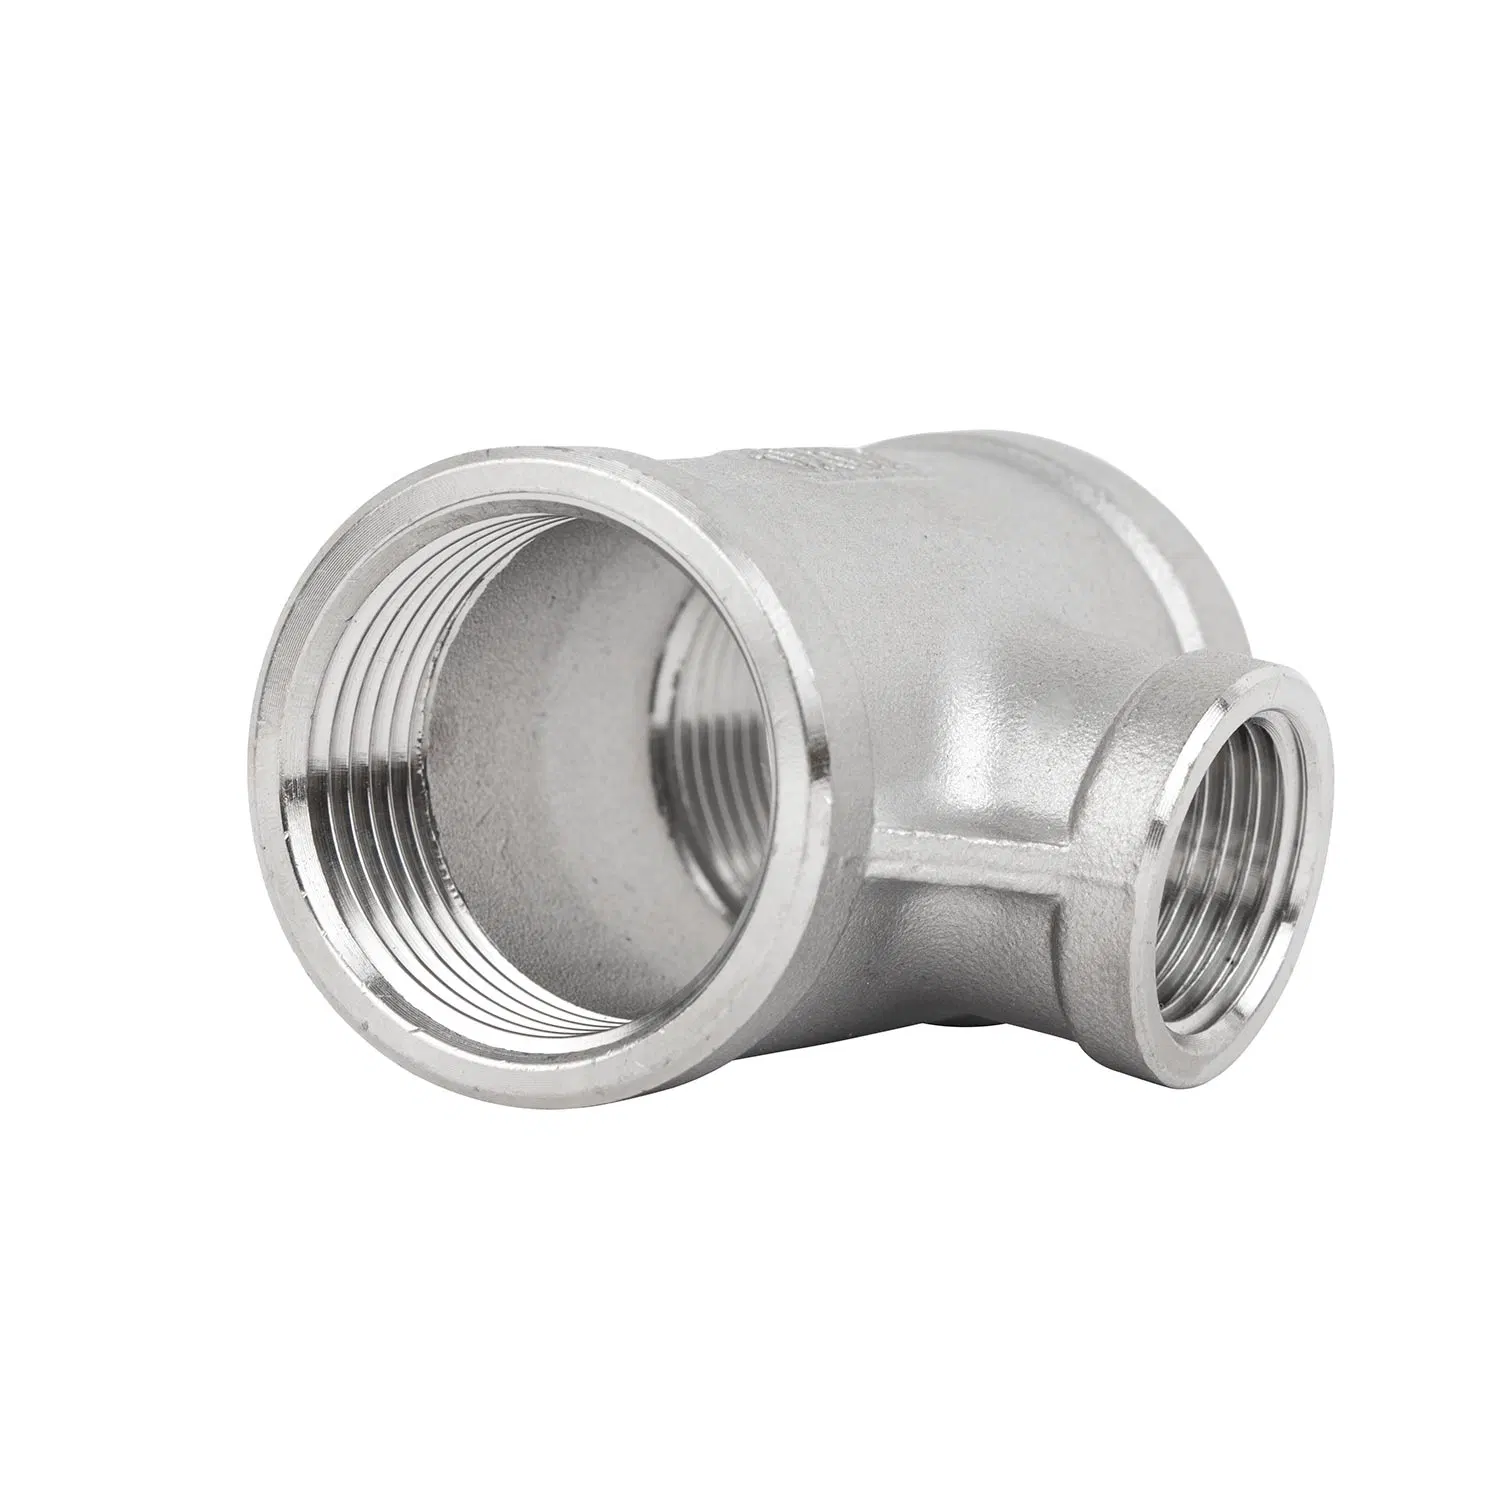 1/2 Inch Female Tee NPT T Shaped 3 Way Casting Pipe Fitting